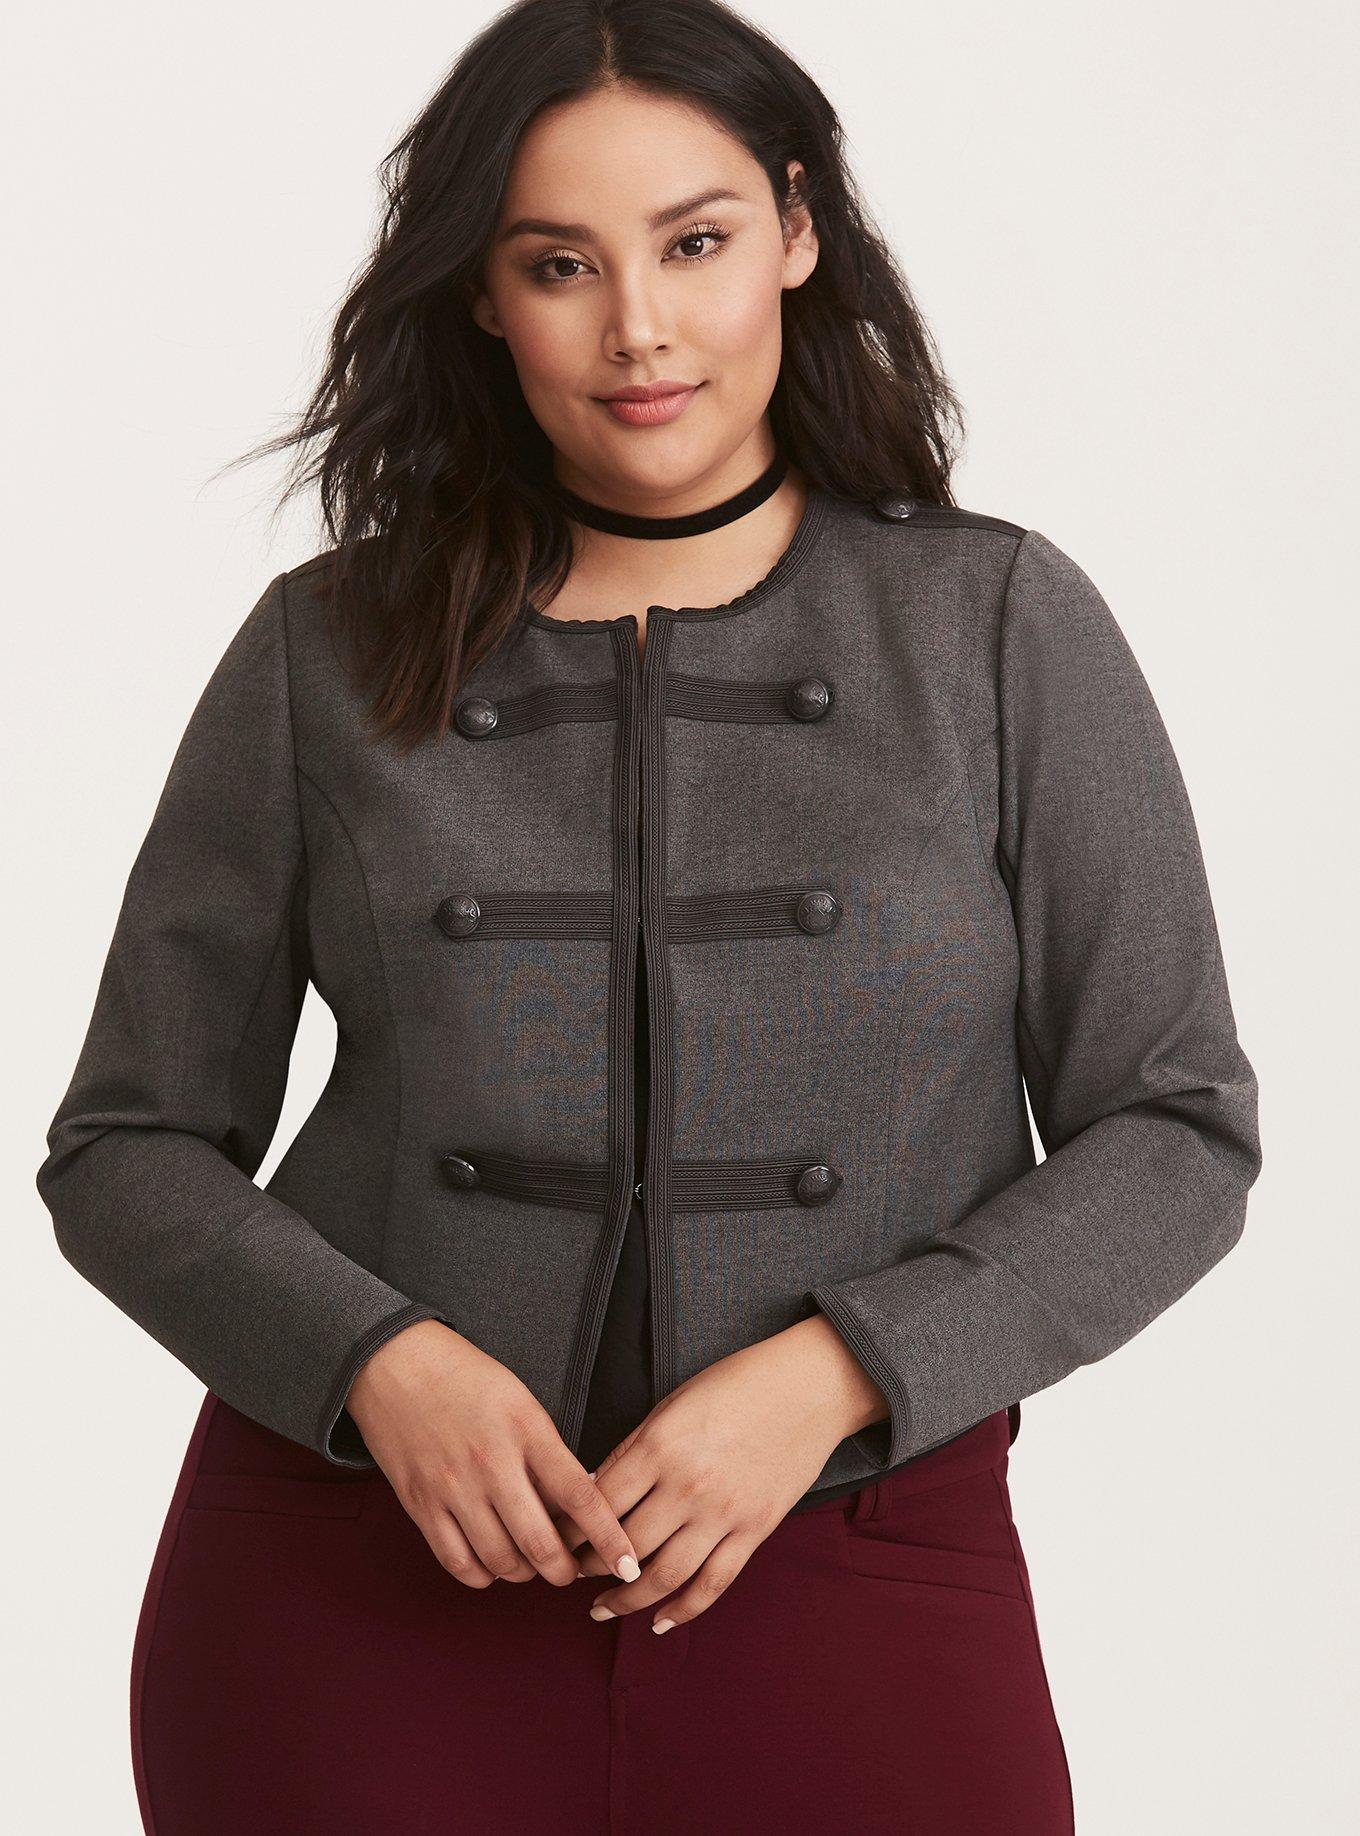 Plus Size - Fitted Military Jacket - Torrid